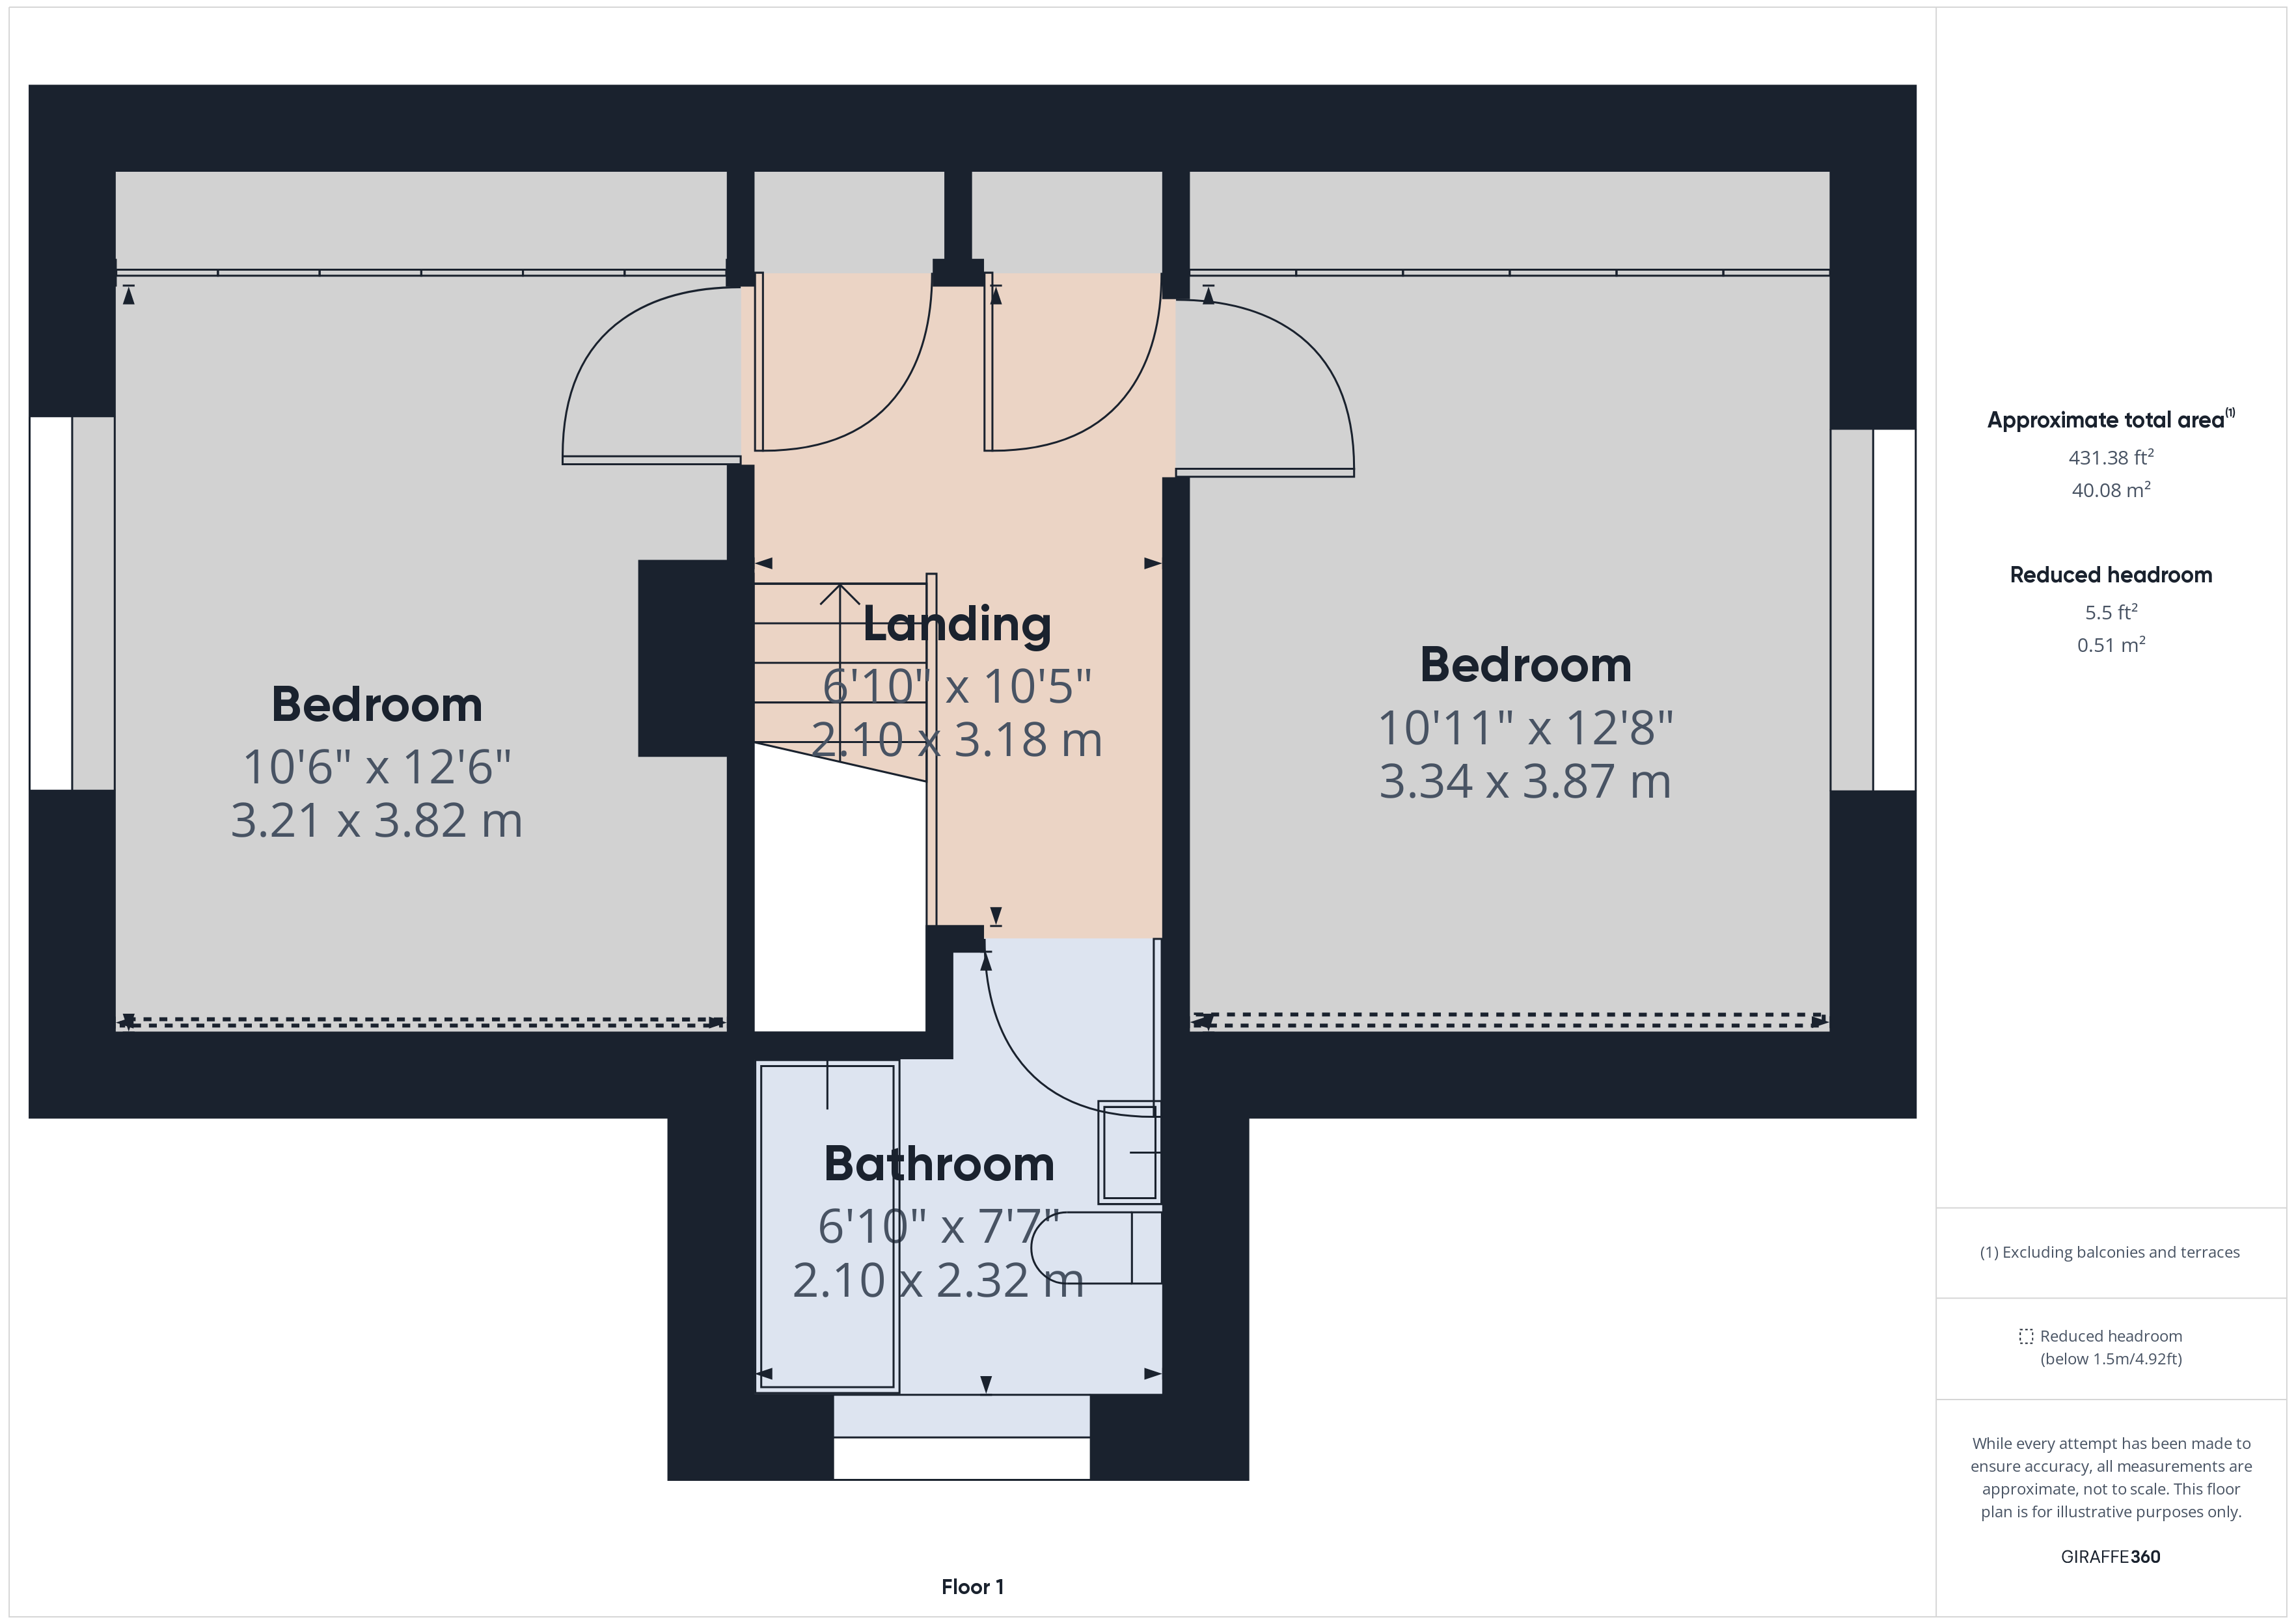 4 bed bungalow for sale - Property floorplan